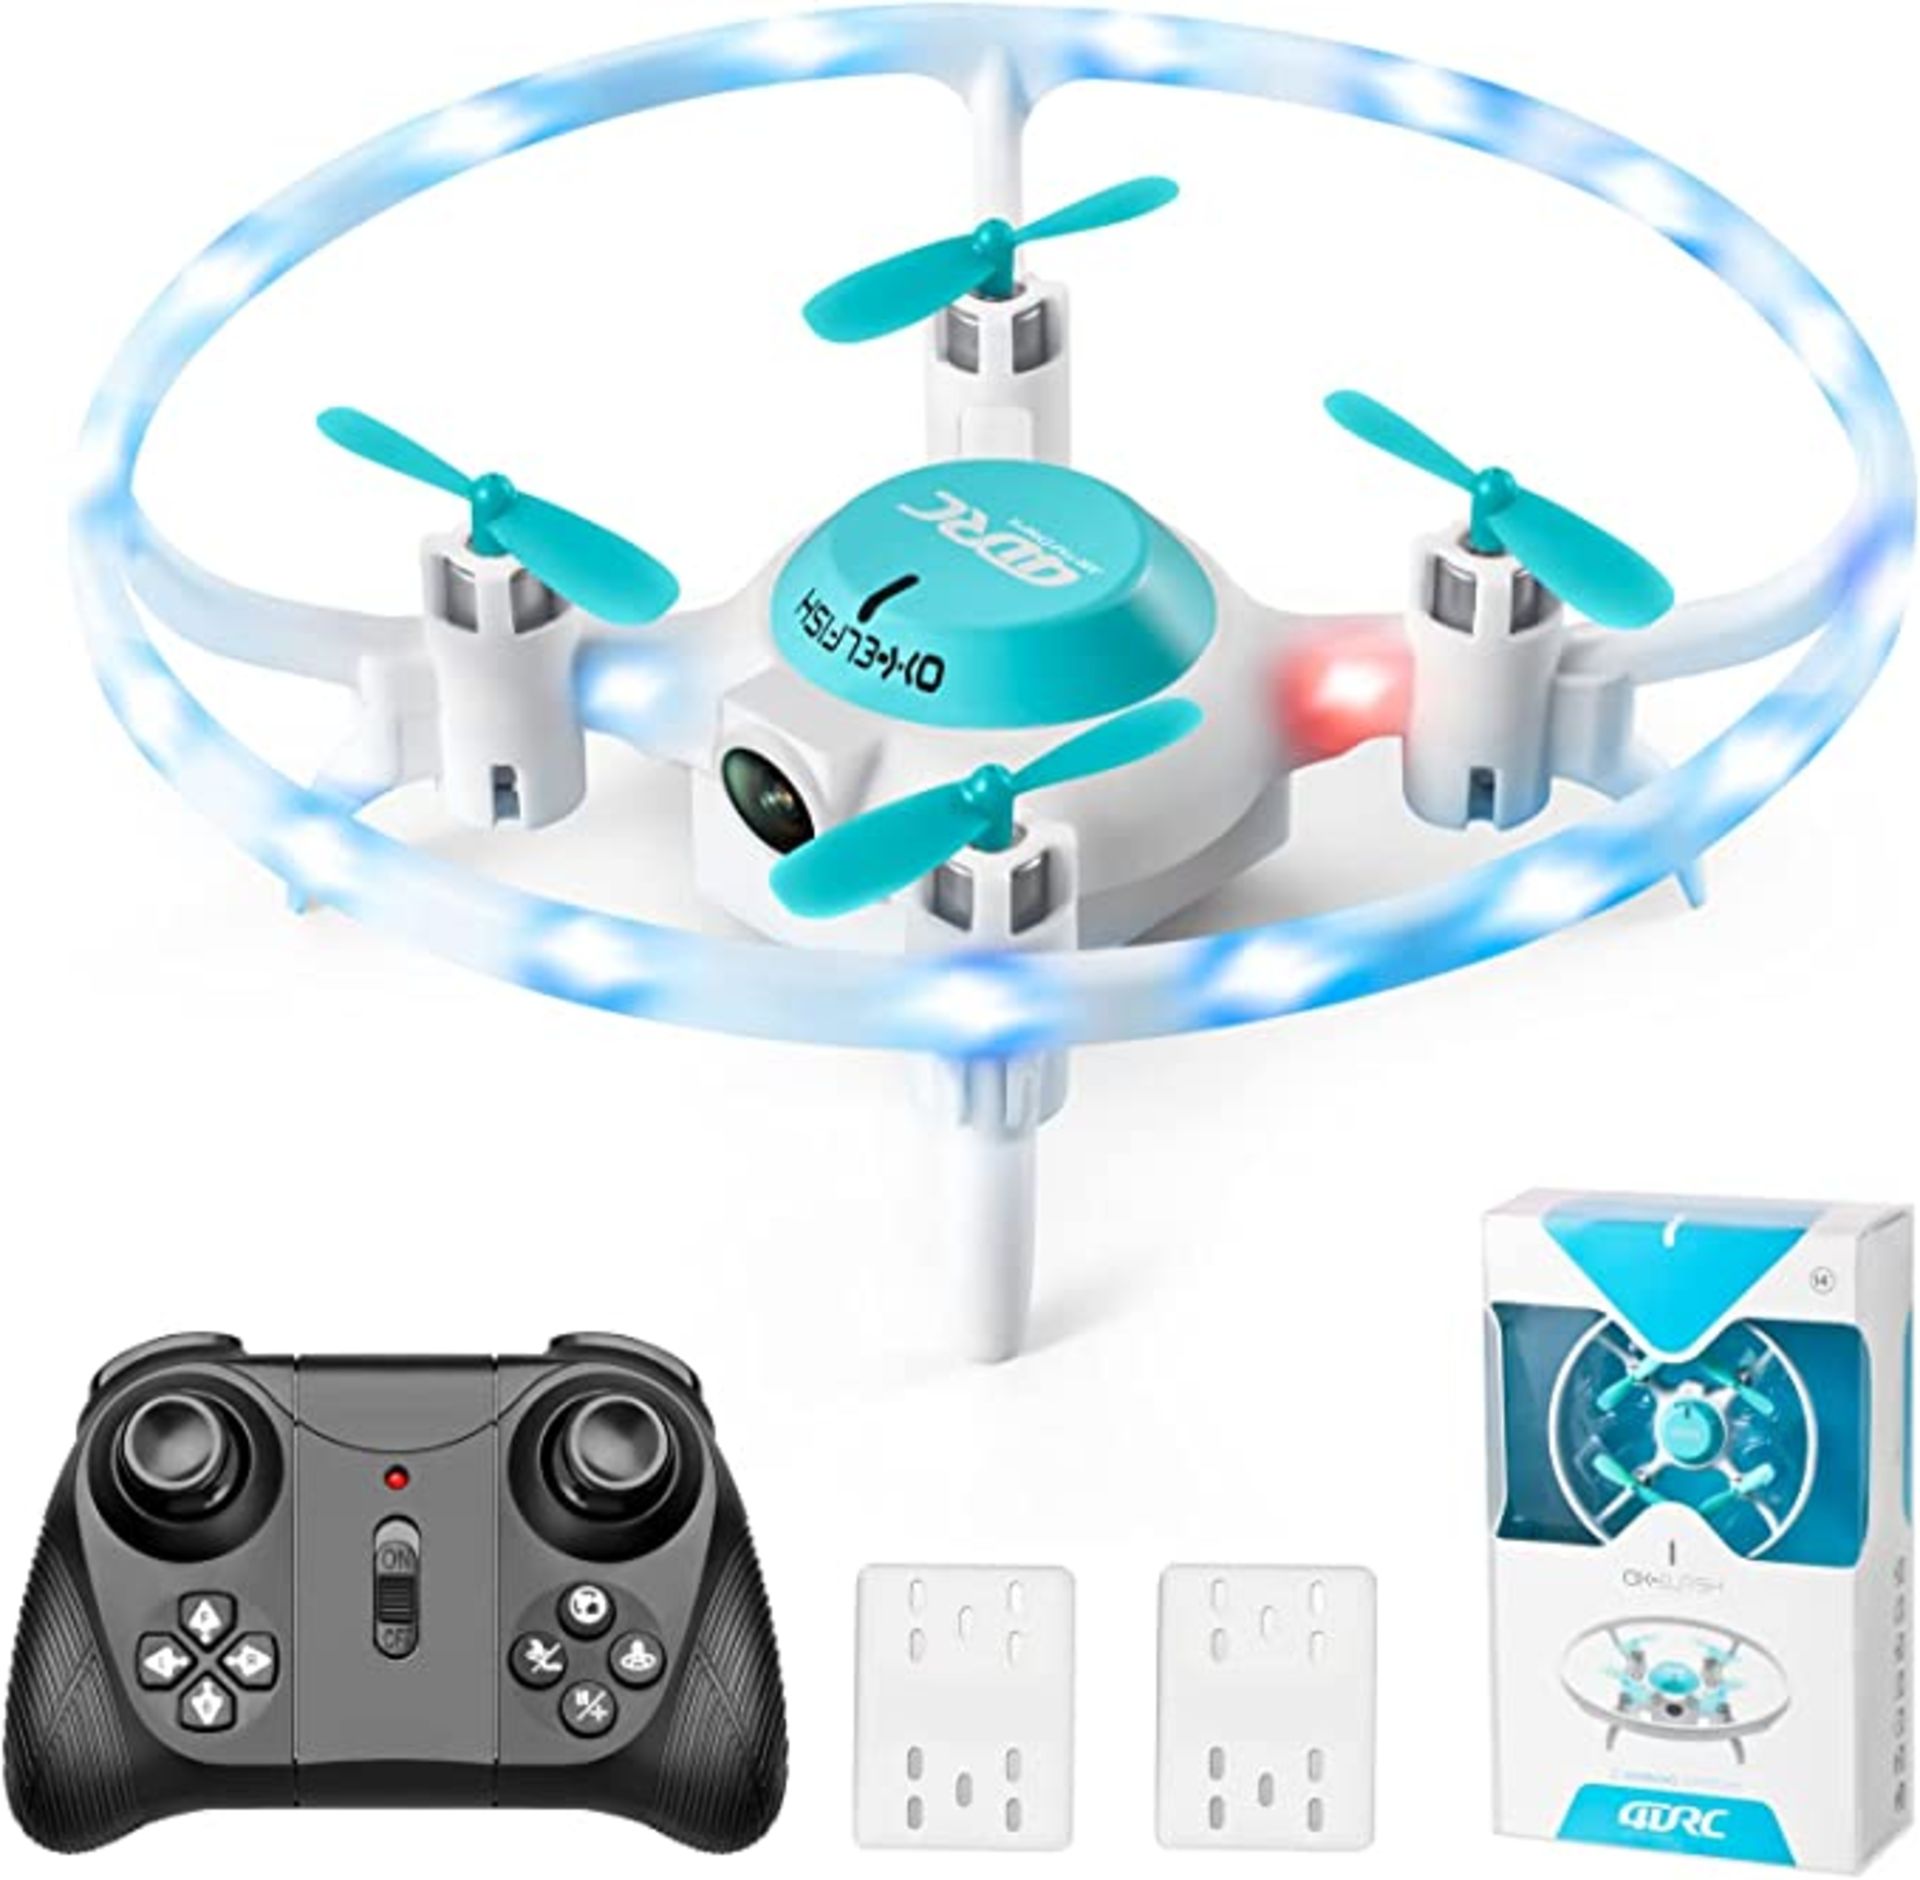 4 x 4DRC Mini Drone for Kids with LED Lights, RC Quadcopter for Beginners, Propeller Full Protect,